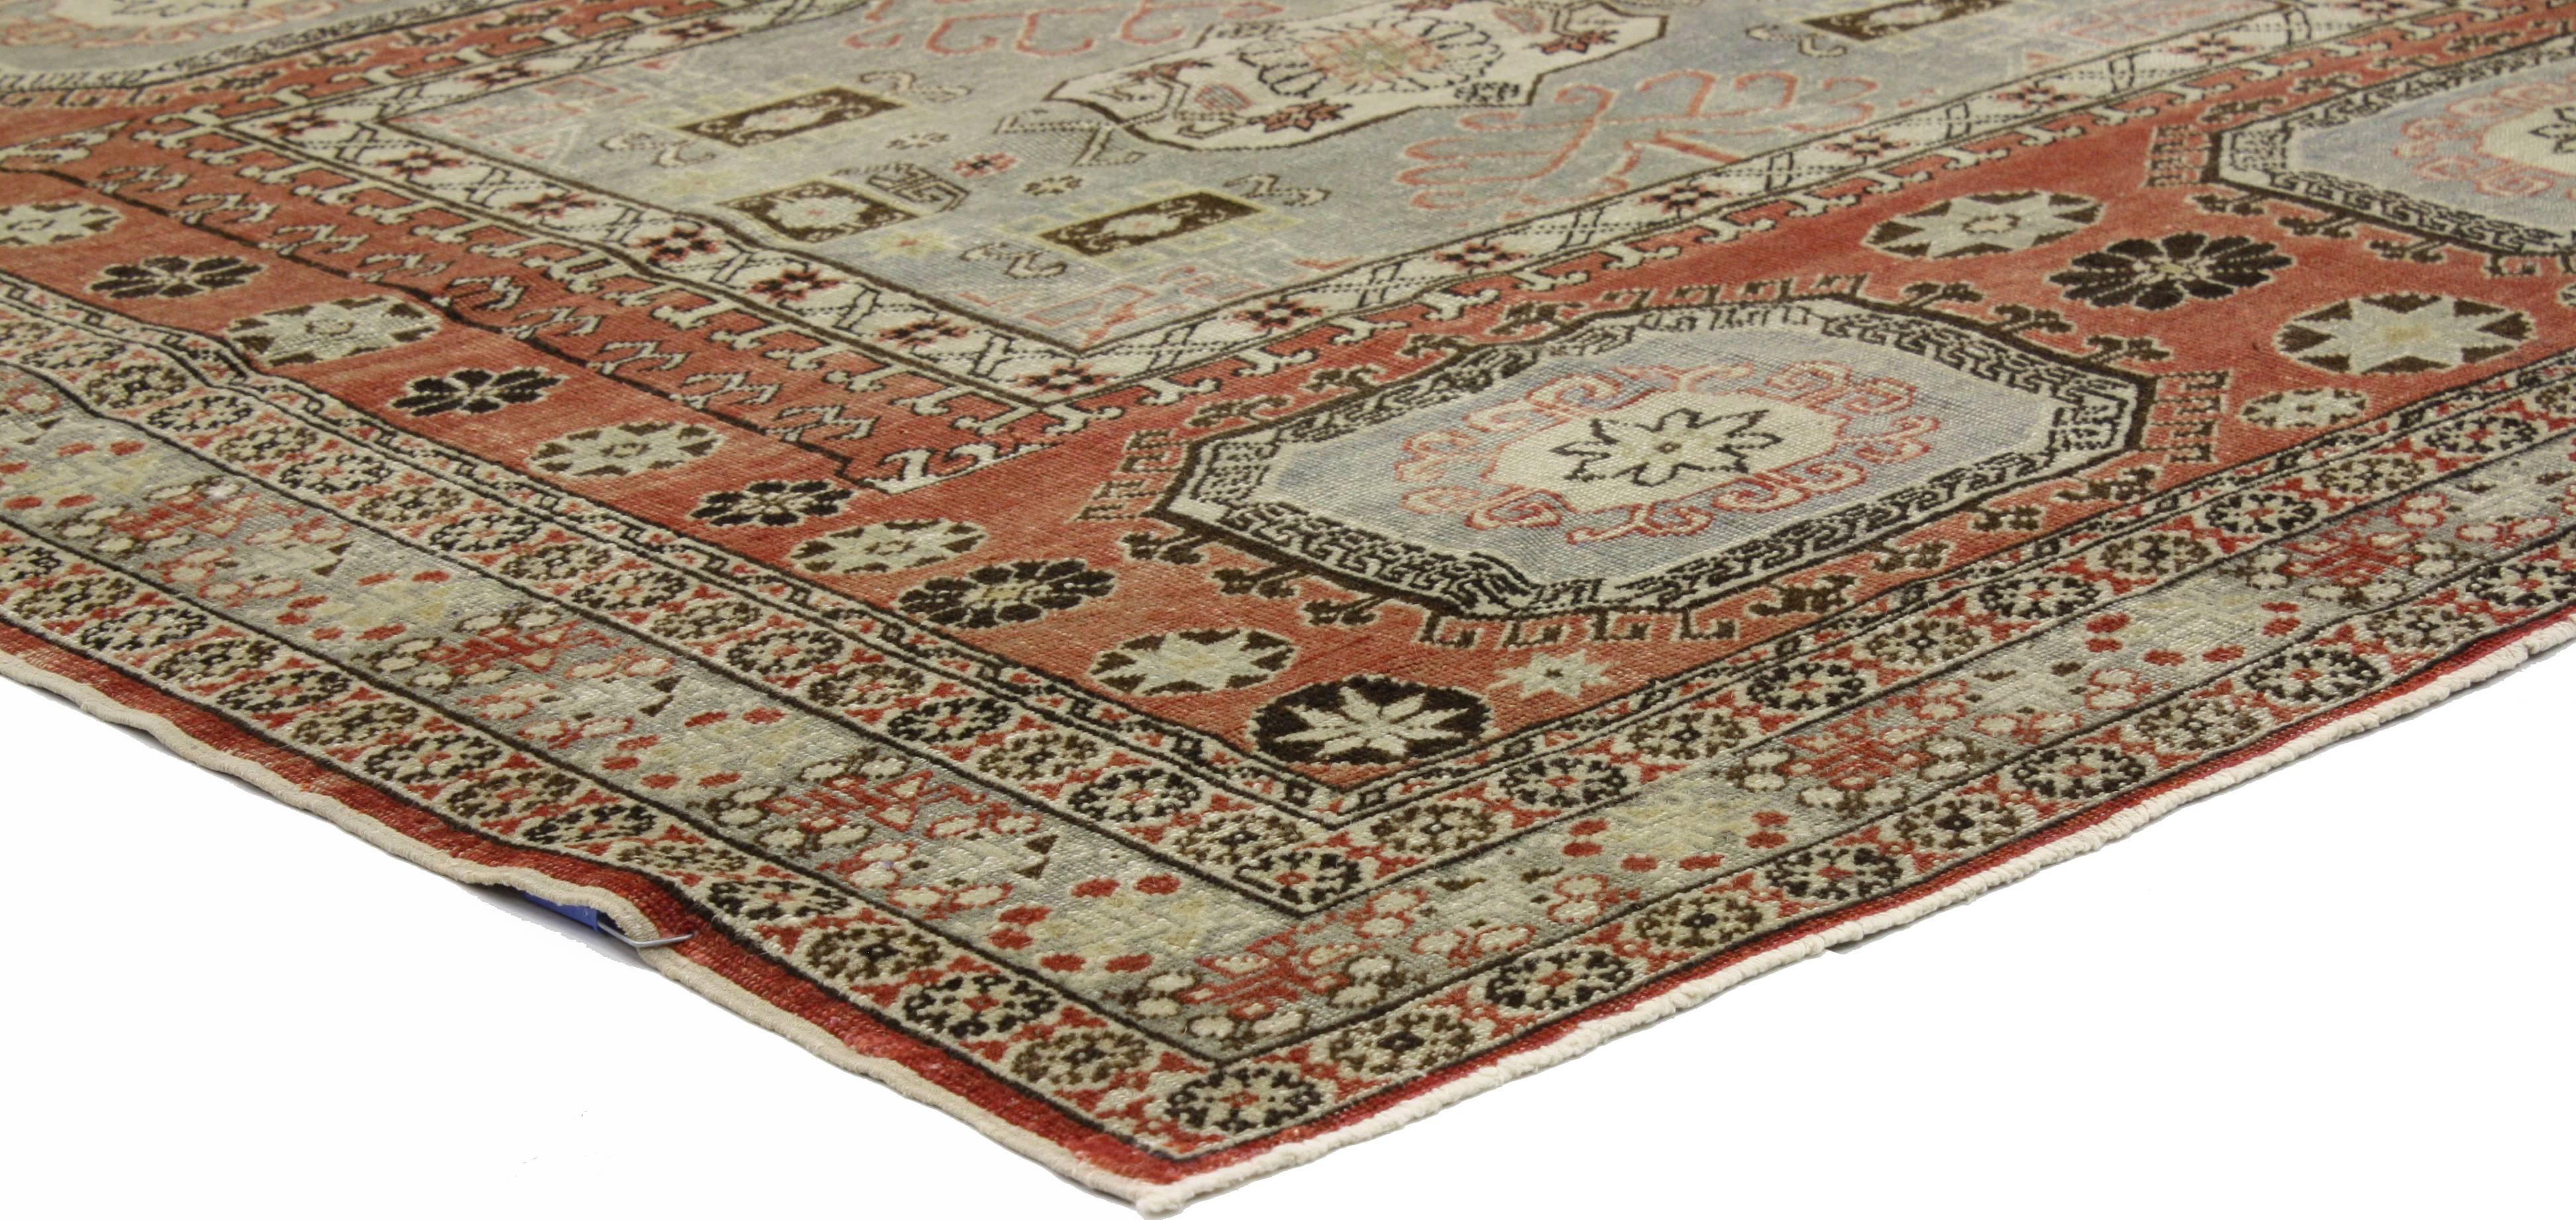 Distressed antique Turkish Sivas rug with Modern Rustic style, Square Accent rug. This hand-knotted wool antique Turkish Sivas square rug with modern rustic style features a rectangular gray medallion filled with double ram horn motifs and a